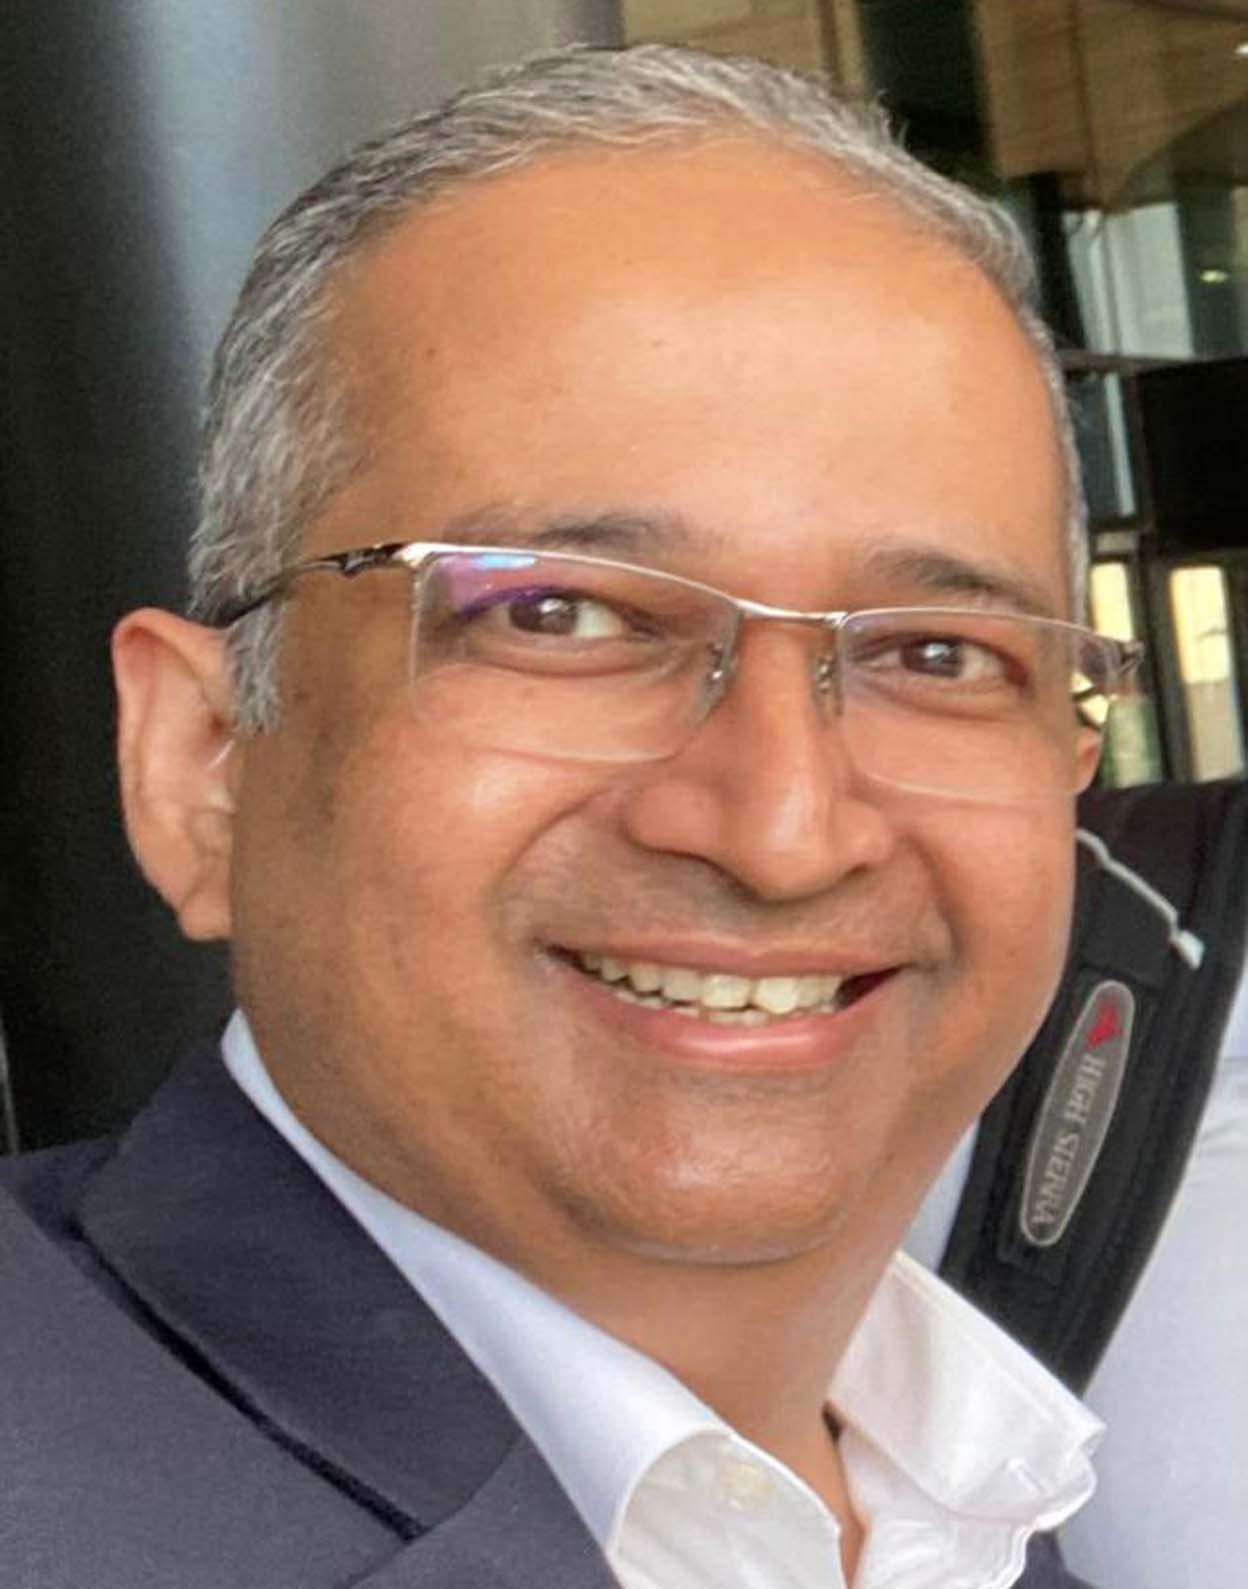 Manoj Chacko, the Chief Executive Officer and Chairman of Fly91